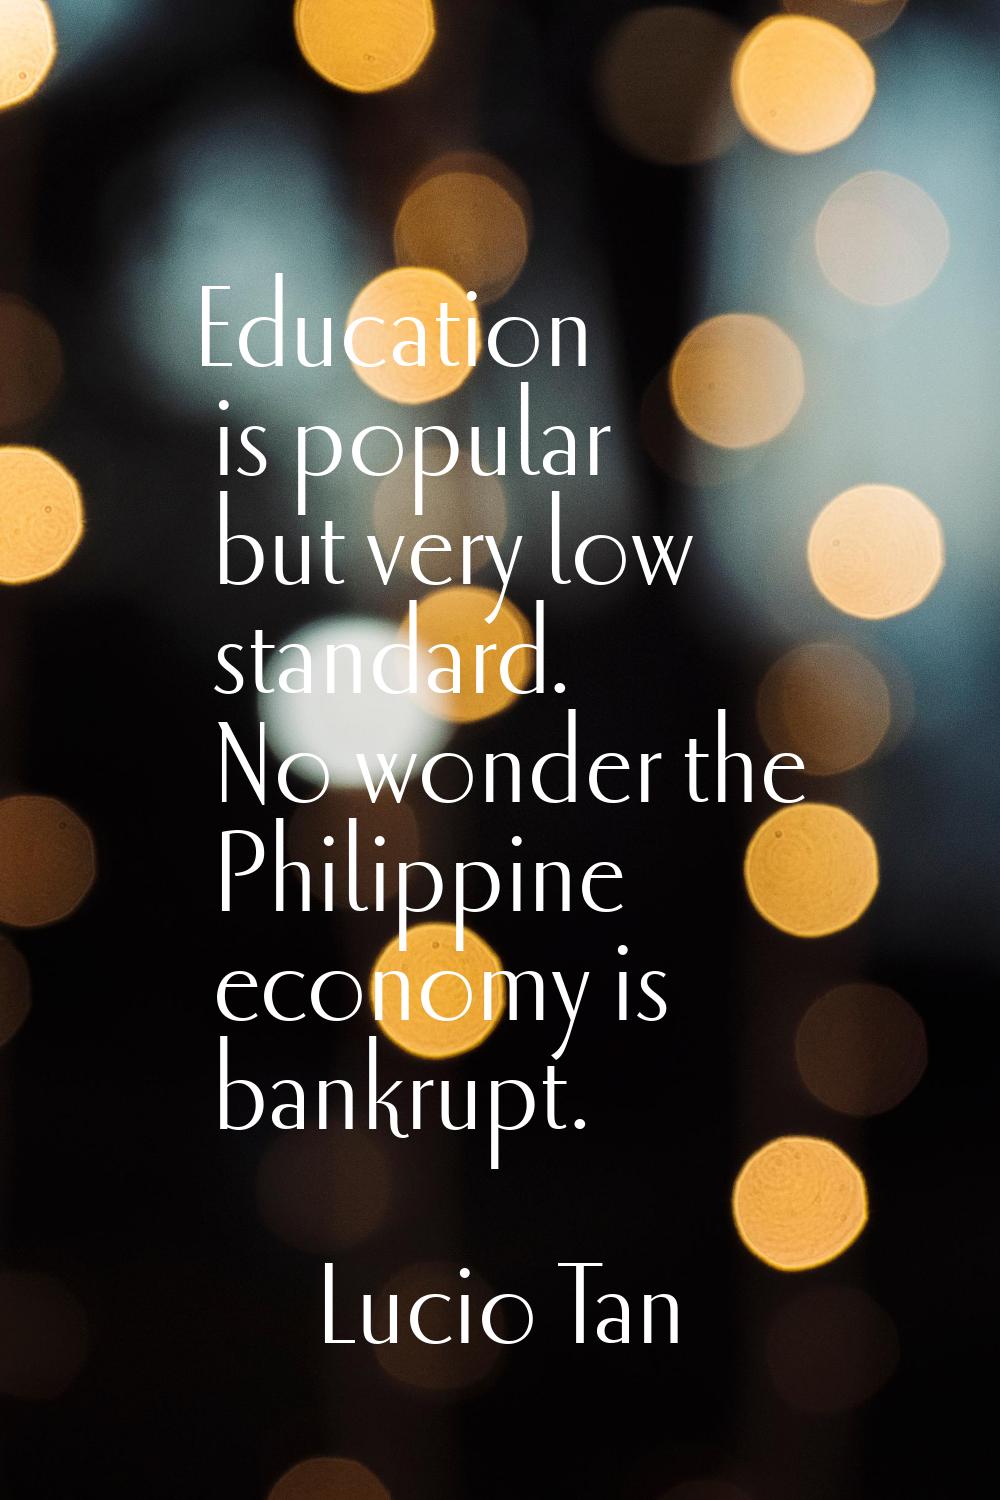 Education is popular but very low standard. No wonder the Philippine economy is bankrupt.